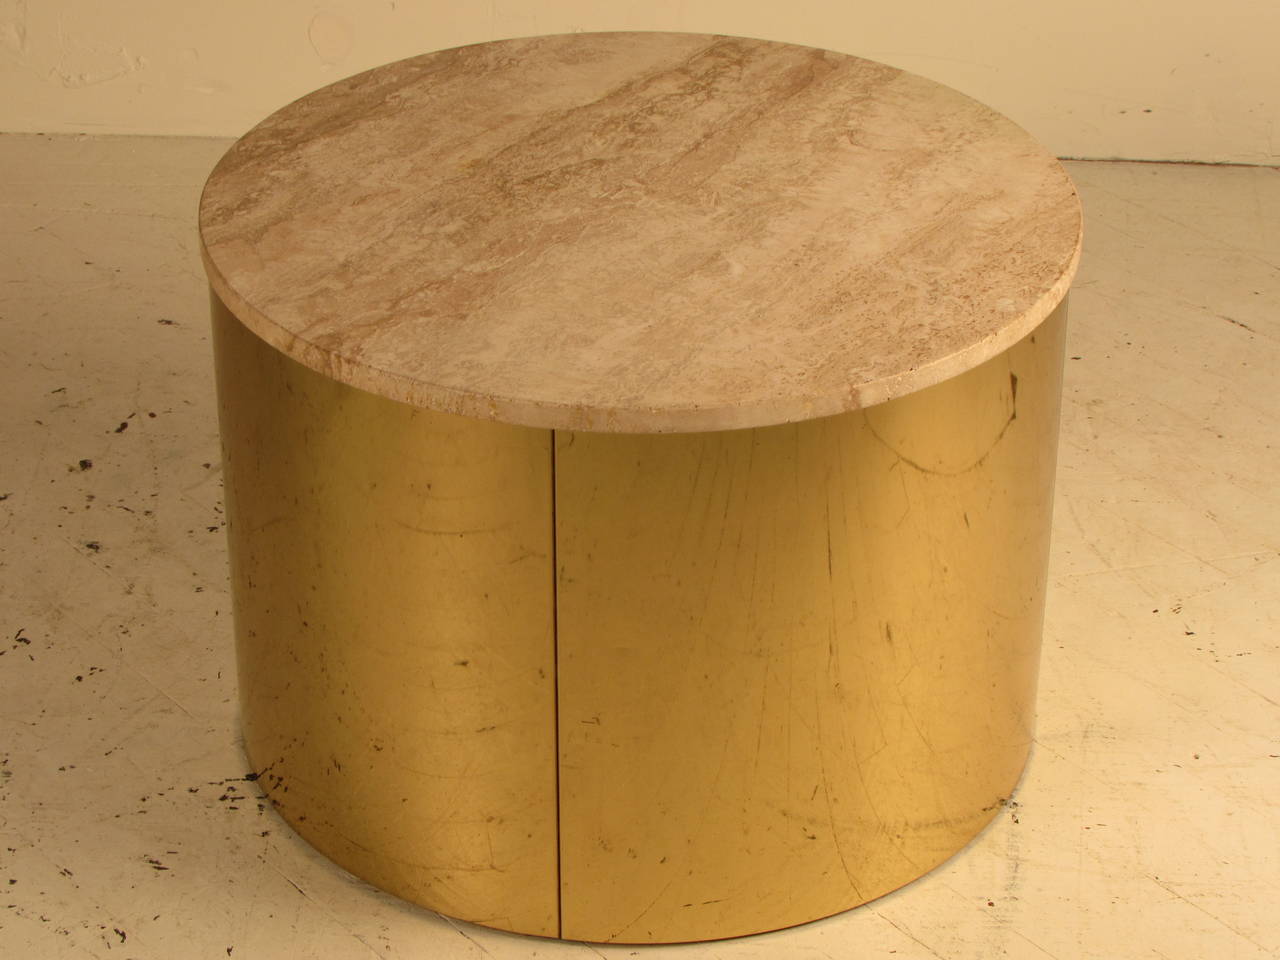 A drum table in a mirror polished finish with a thick travertine top. Signed C. Jere. The brass glows with a warm golden tone. Dimensions of this piece could work as either a side table or small cocktail table. 

Brass is in good condition with